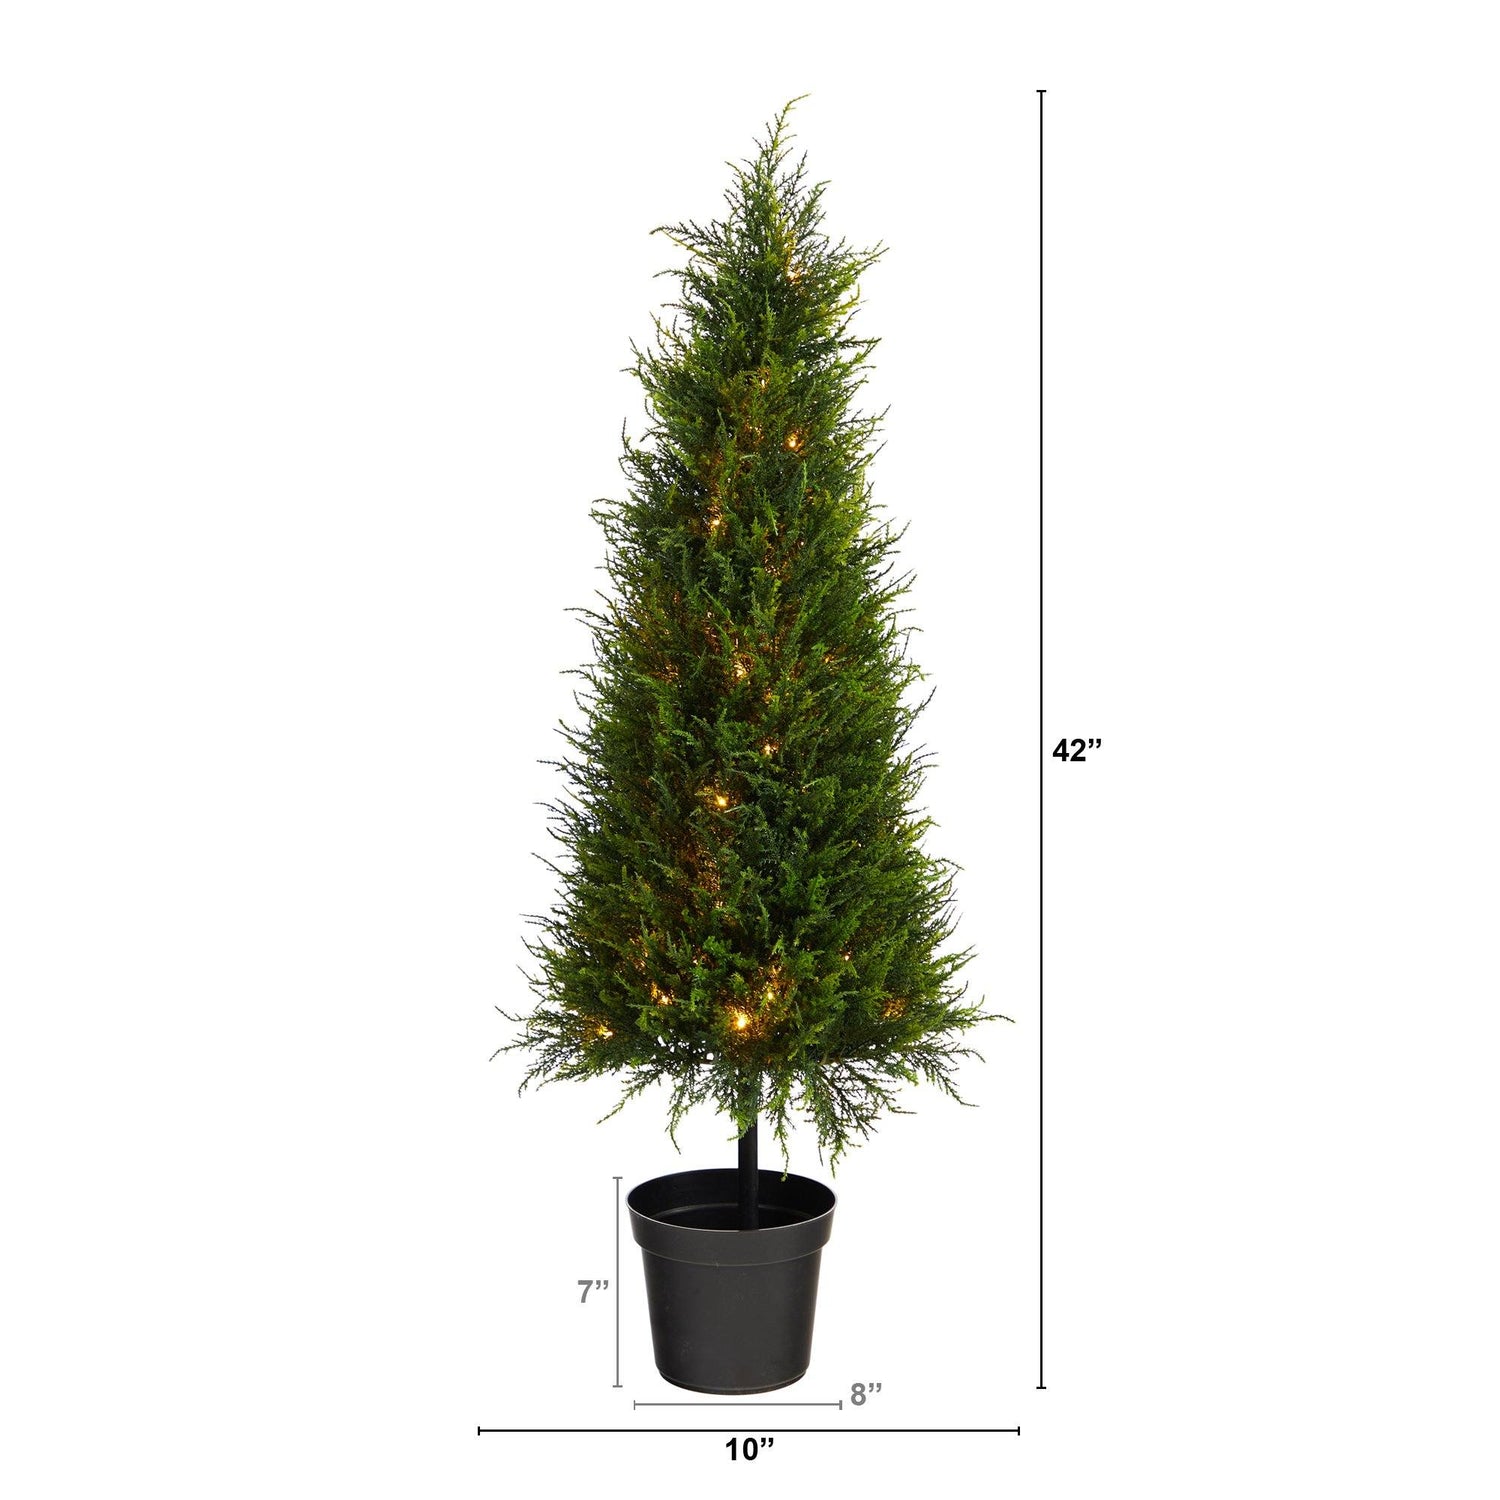 3.5’ Cypress Artificial Tree with 350 LED Lights UV Resistant (Indoor/Outdoor)